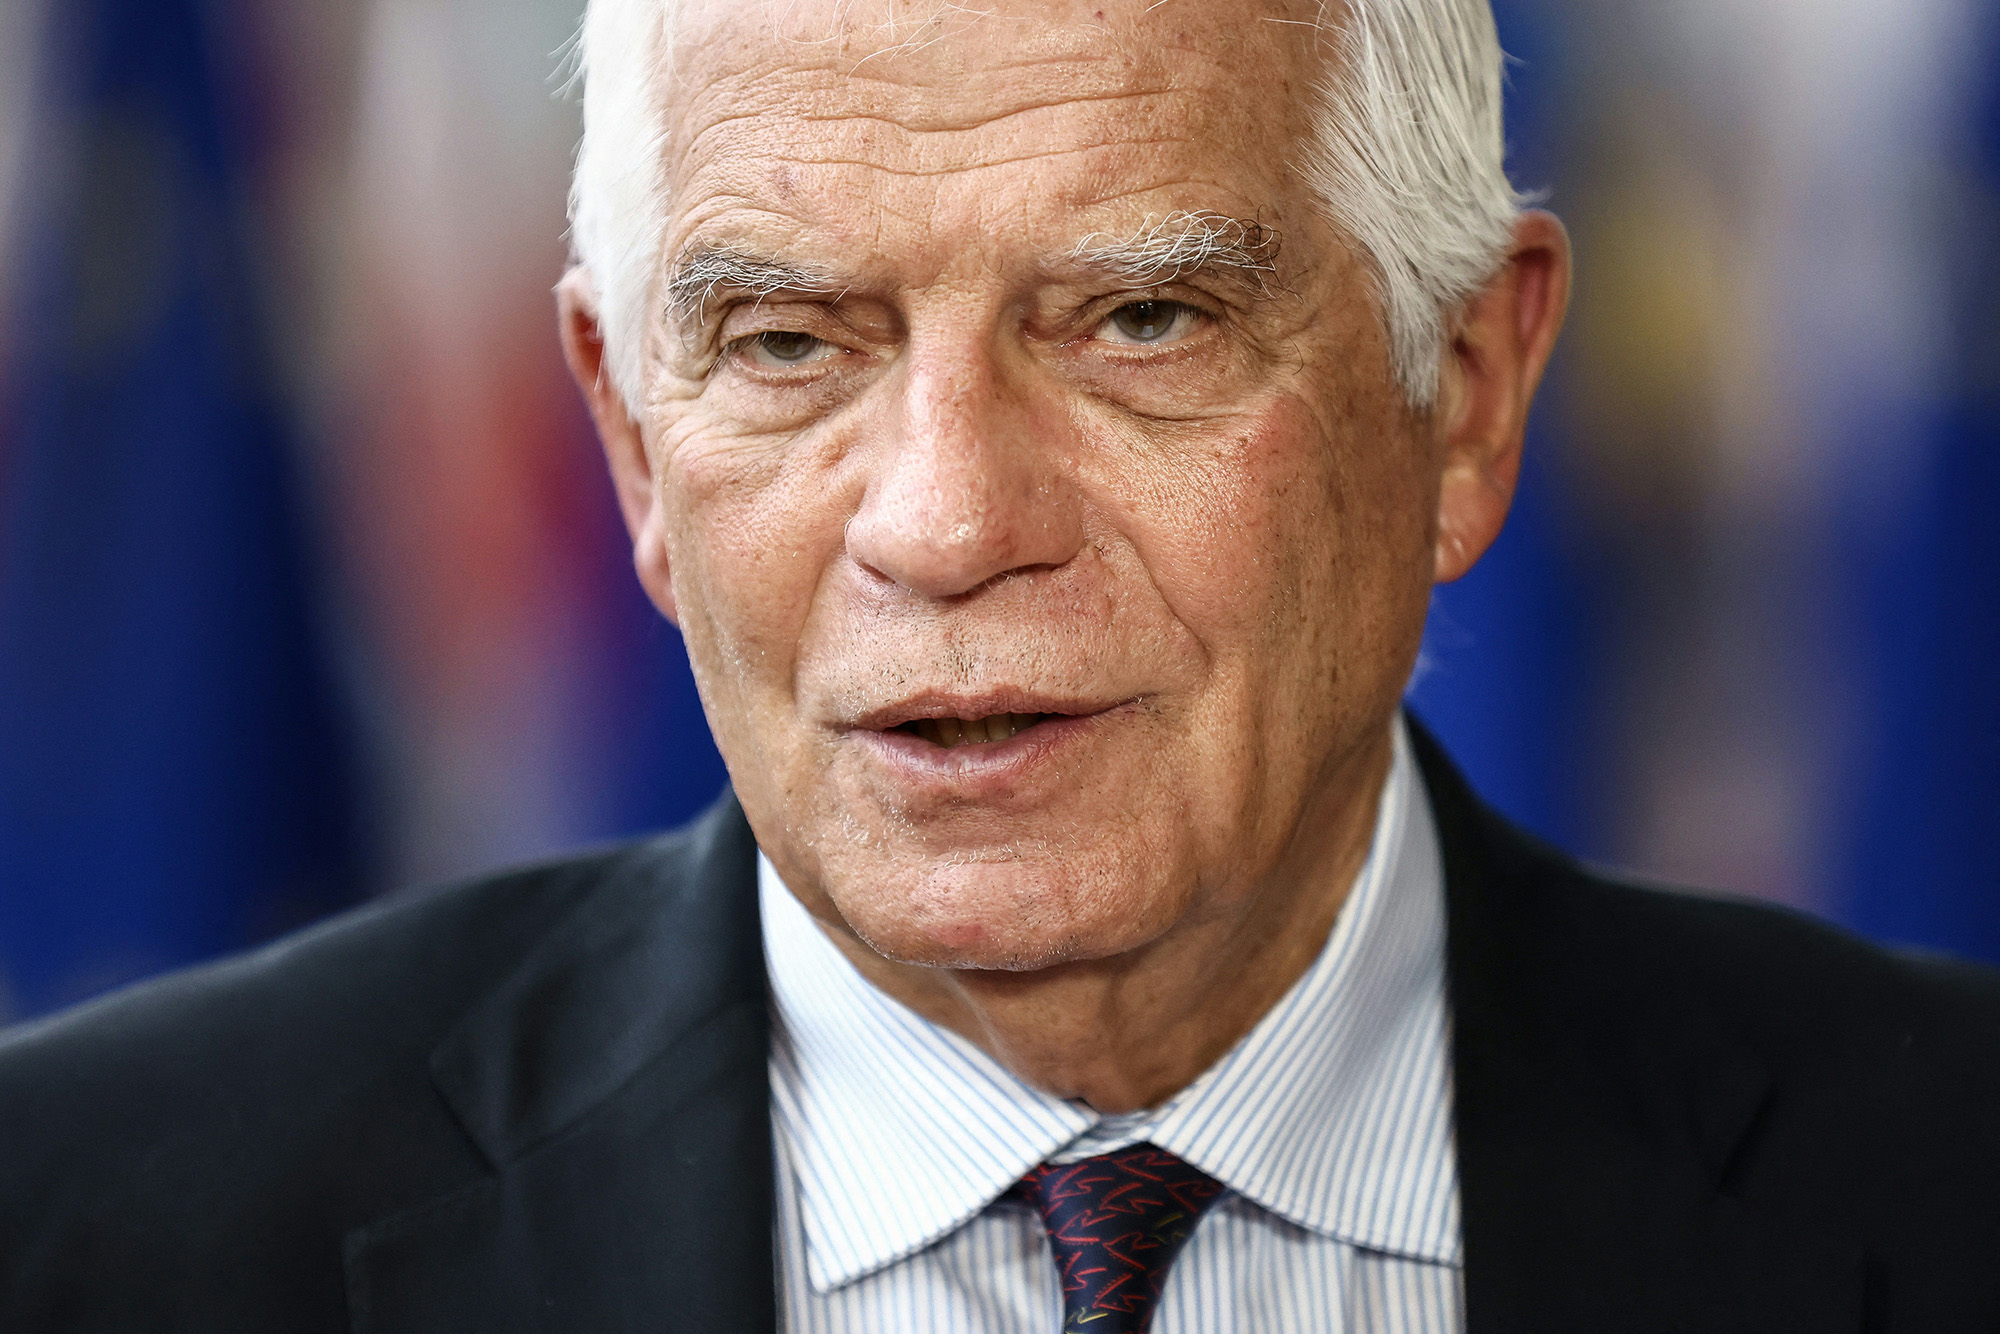 European Commission vice-president Josep Borrell speaks to journalists as he arrives at the European Council in Brussels, Belgium, on October 3.